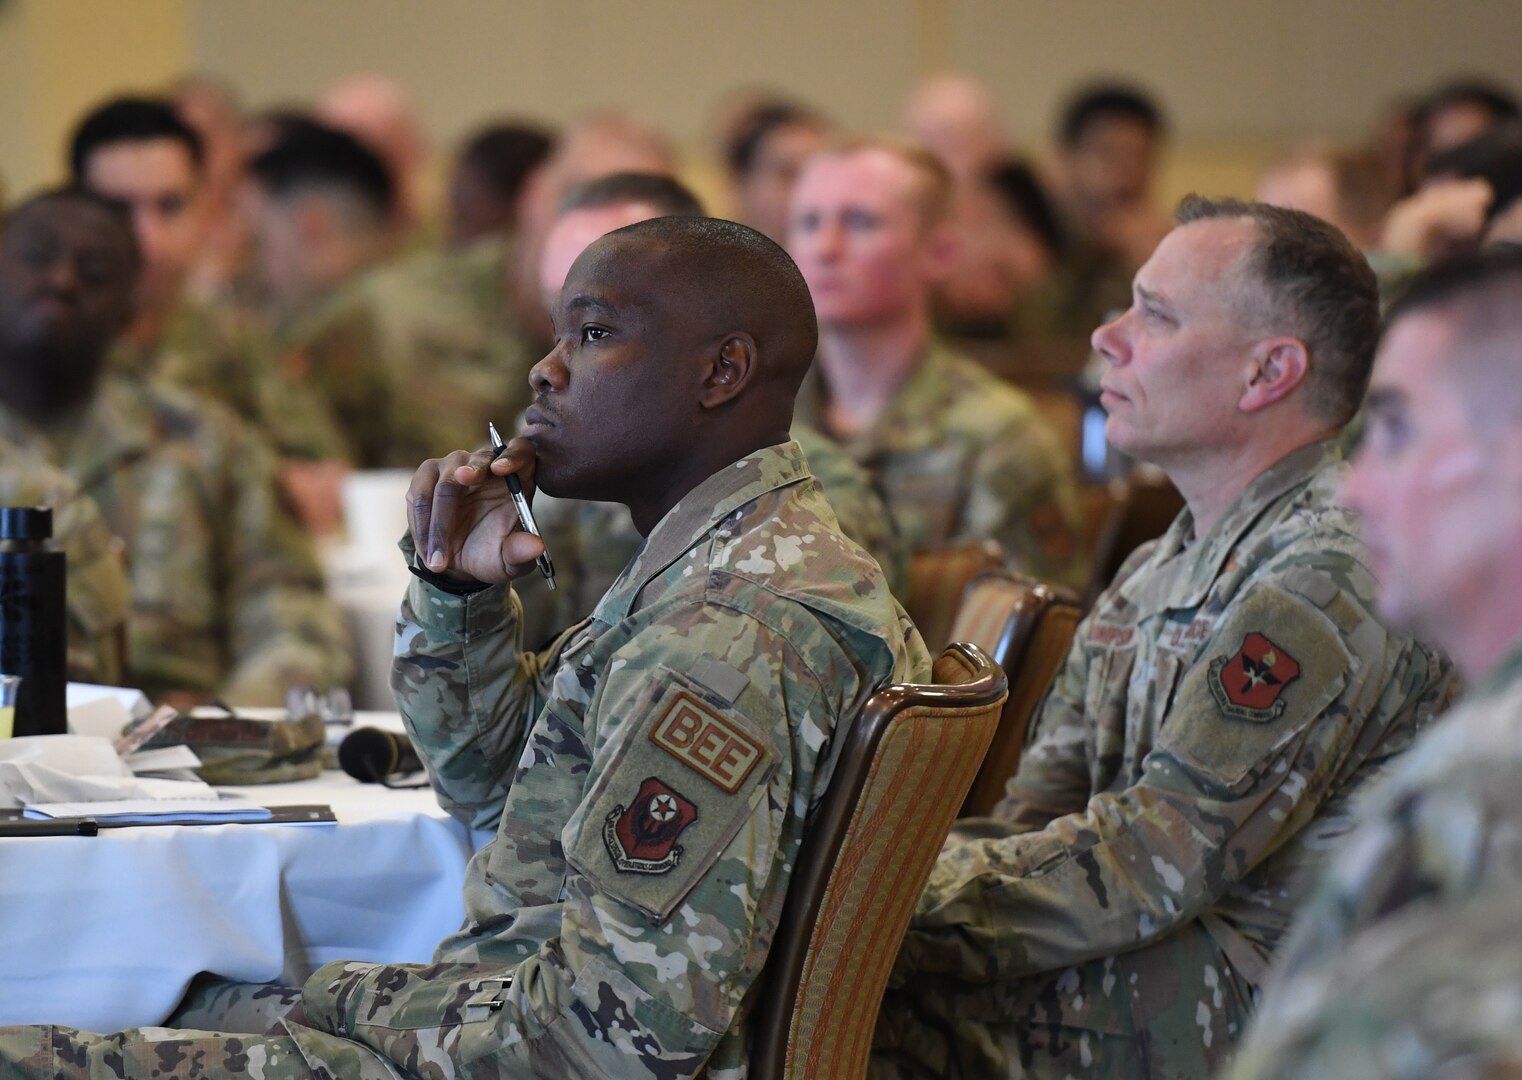 U.S. Air Force Airman 1st Class Bamowo Okunowo, 1st Special Operations Medical Readiness Squadron bioenvironmental engineering technician, listens to the 'emotional intelligence' briefing during the inaugural Torch and Dagger professional development seminar at Keesler Air Force Base, Mississippi, October 14, 2022.